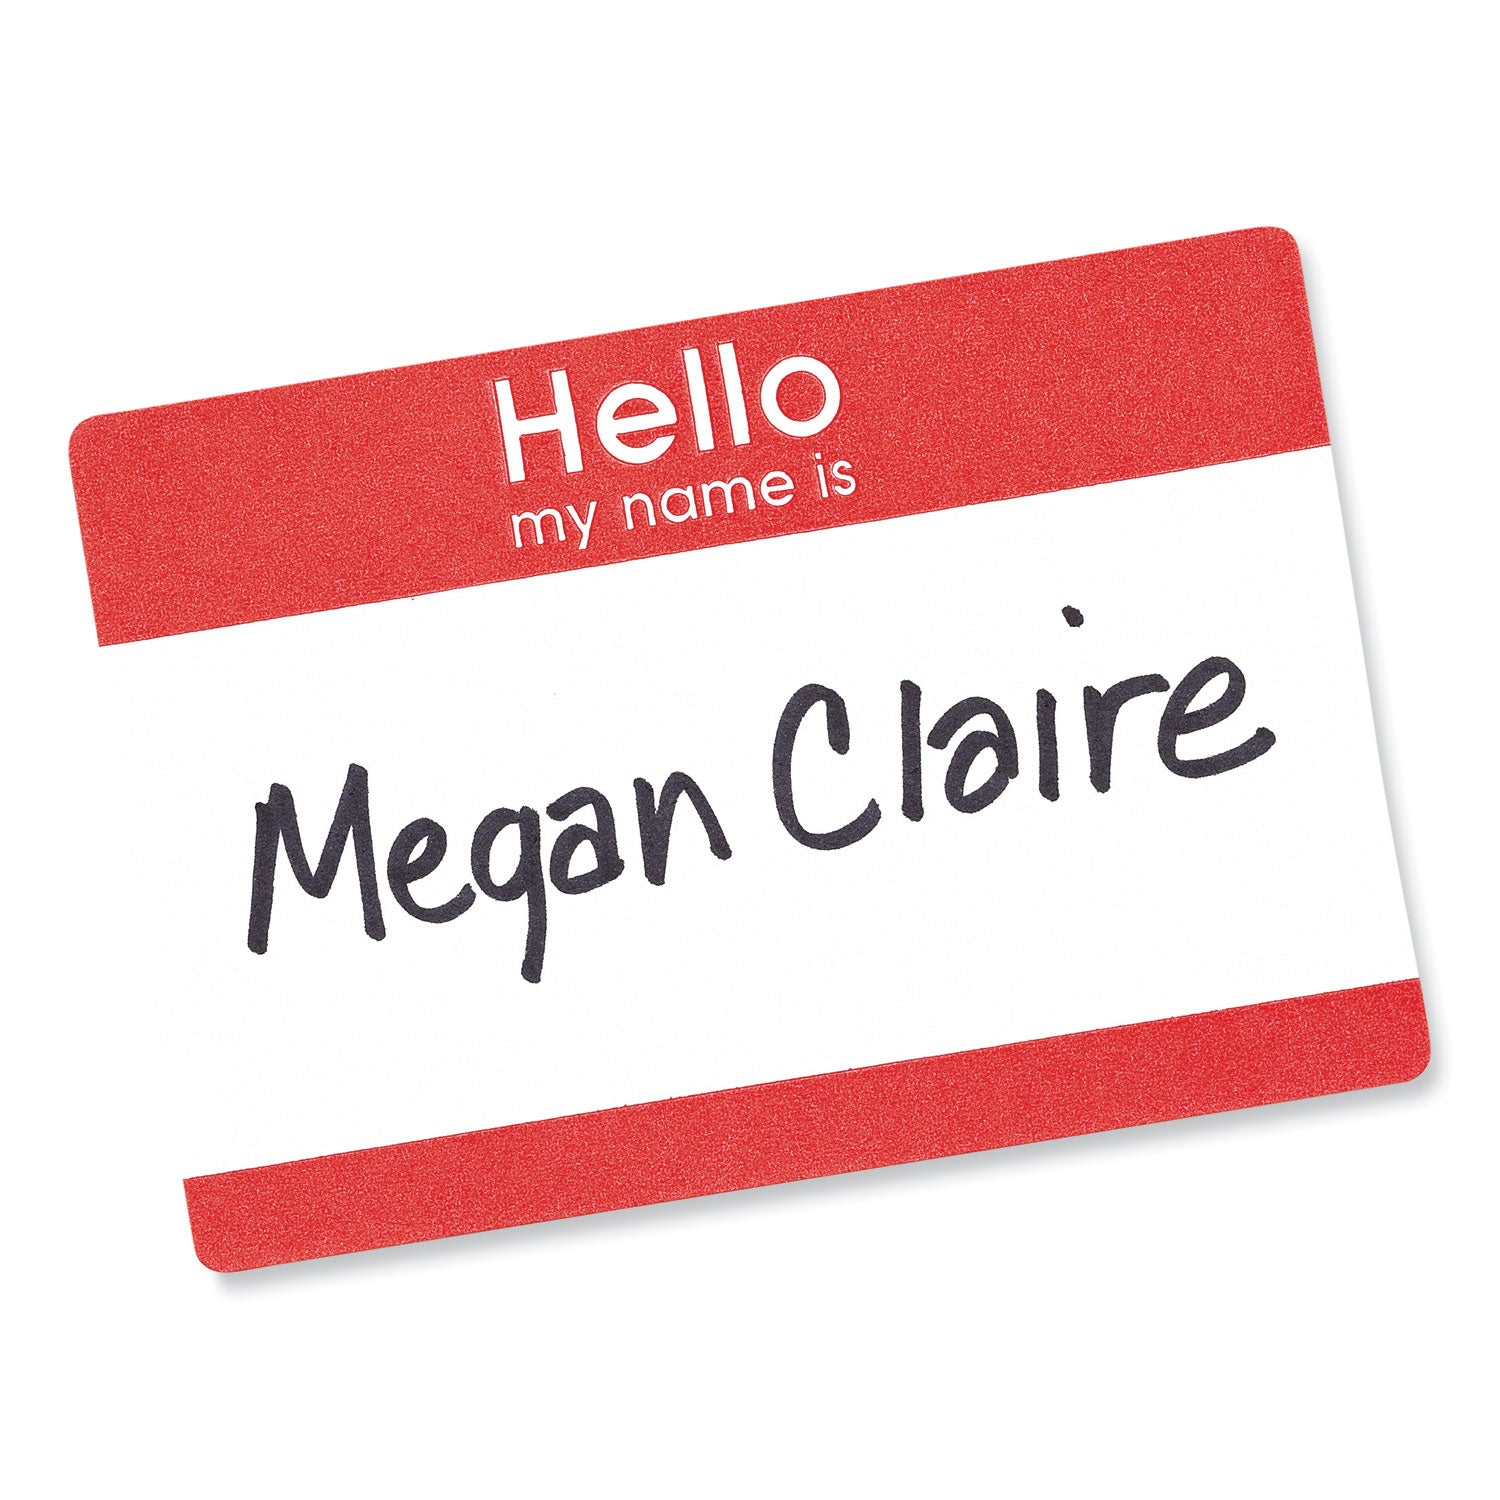 printable-self-adhesive-name-badges-2-1-3-x-3-3-8-red-hello-100-pack_ave5140 - 2